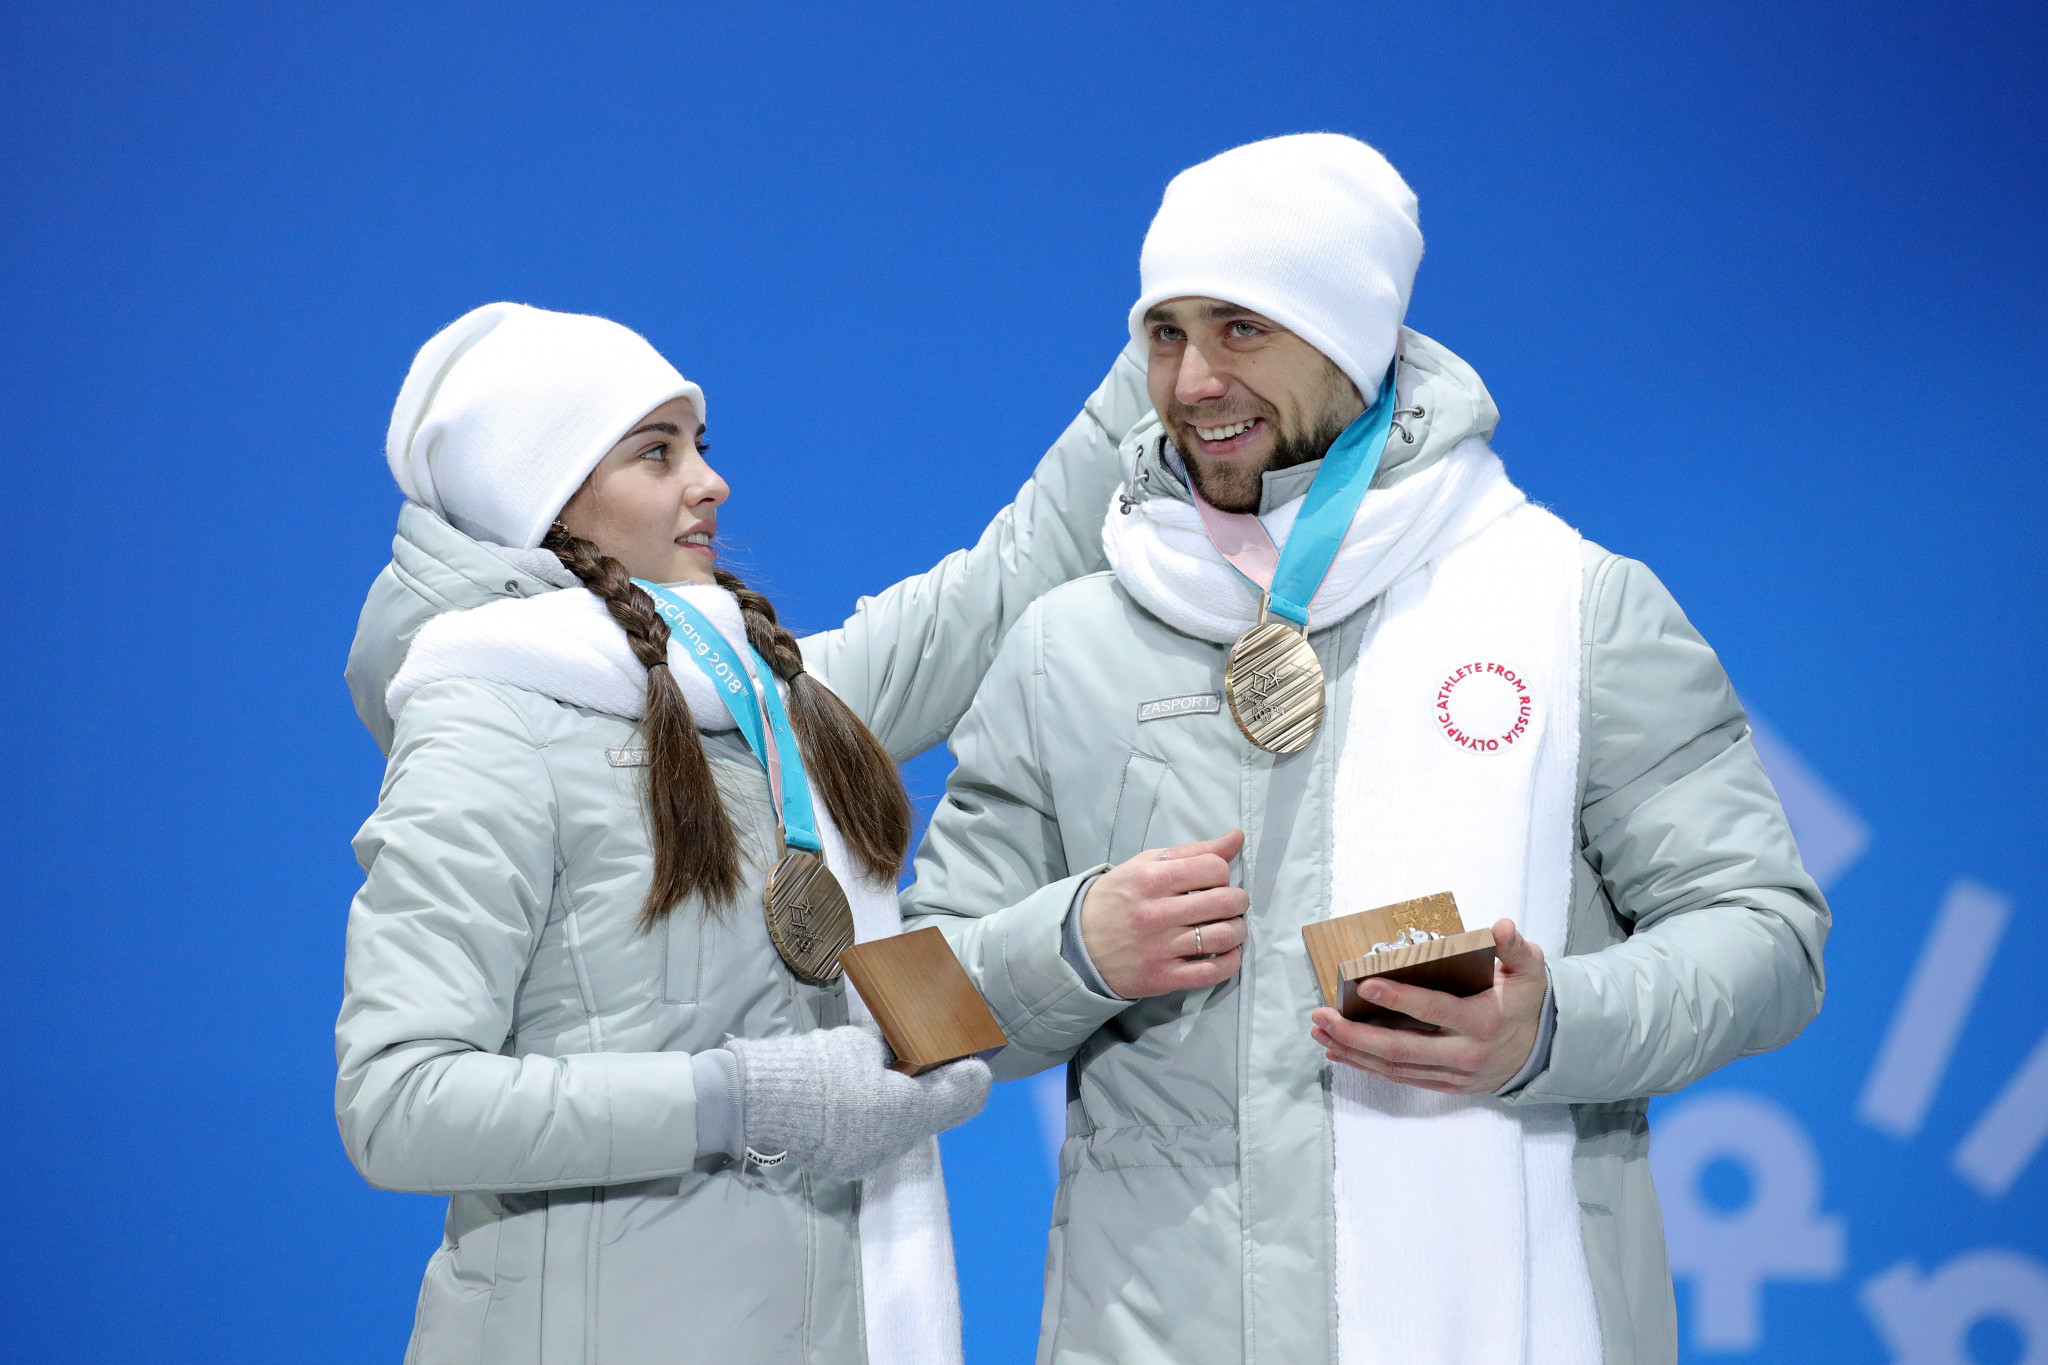 Aleksandr Krushelnitckii and wife Anastasia Bryzgalova were stripped of their Olympic mixed doubles bronze medals ©Getty Images